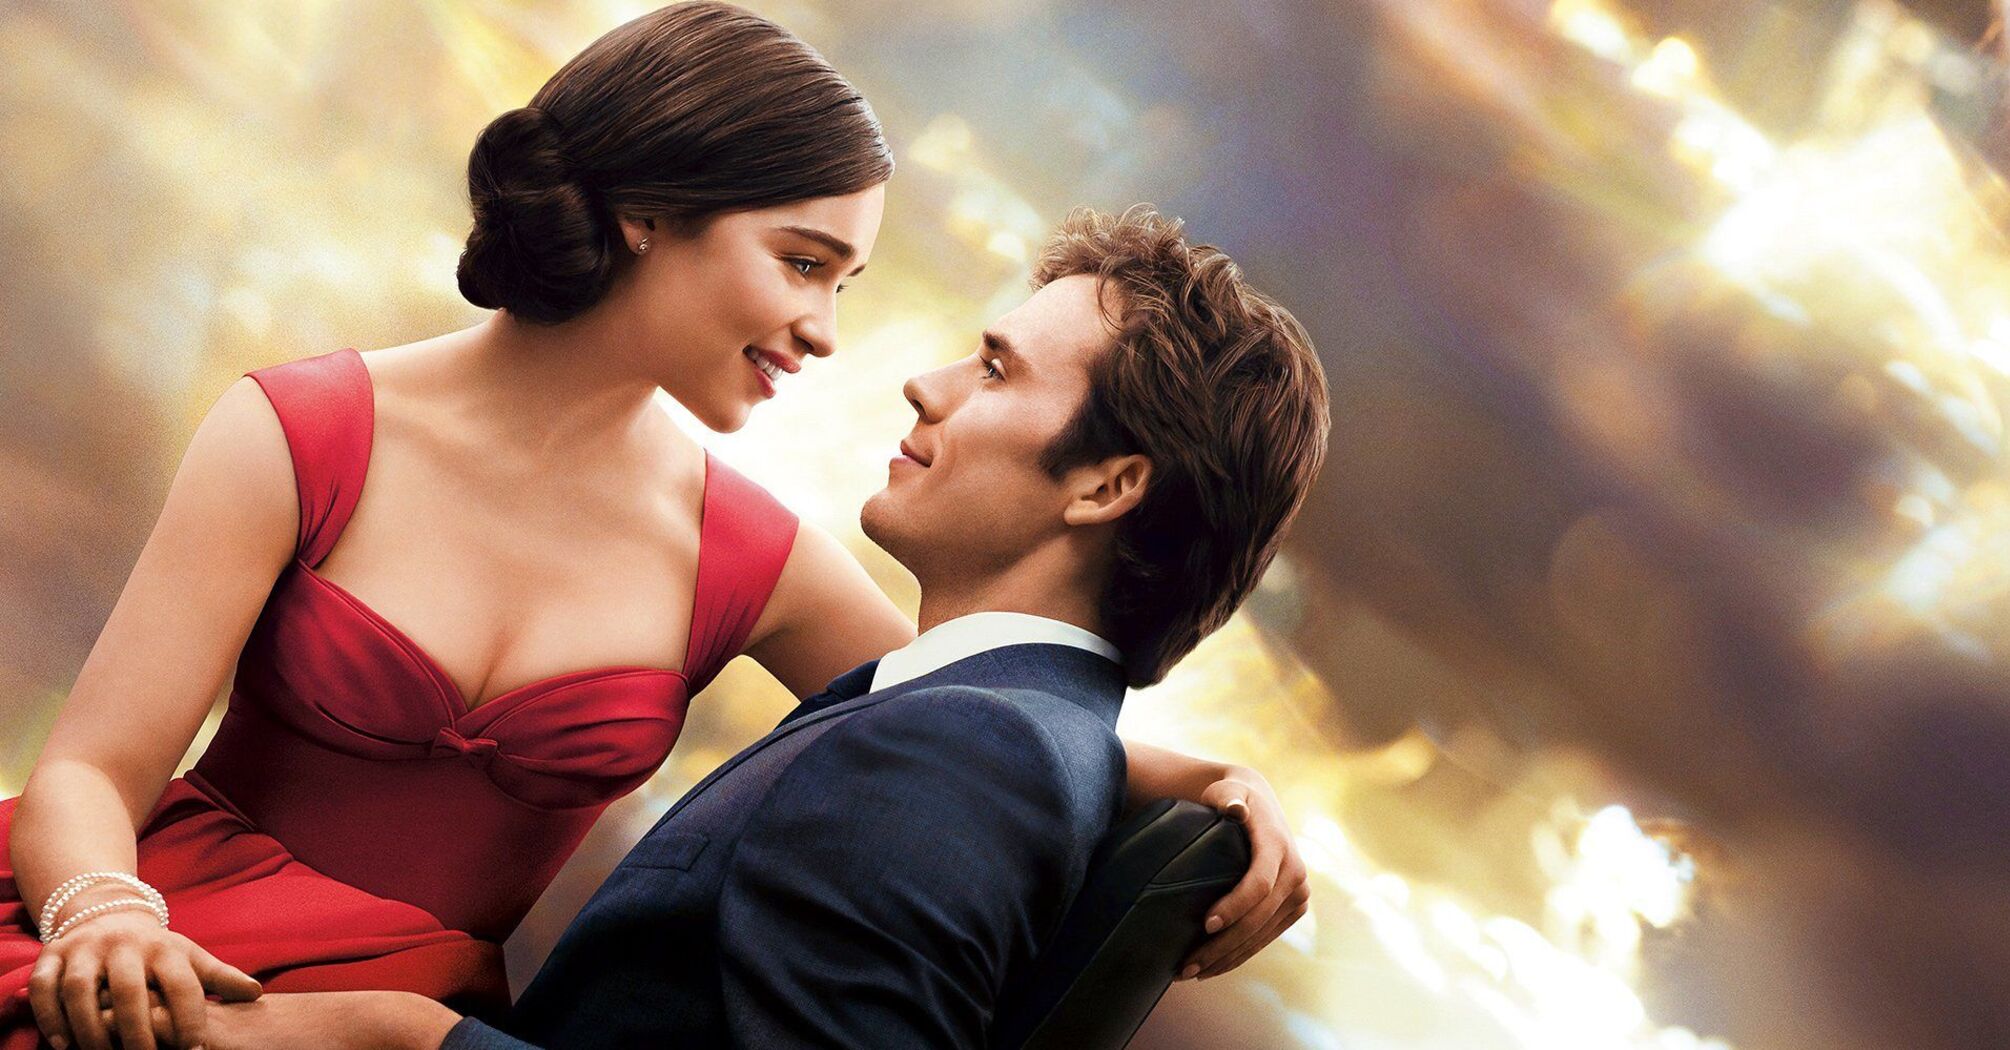 Top 7 inspiring movies about true love that won't disappoint